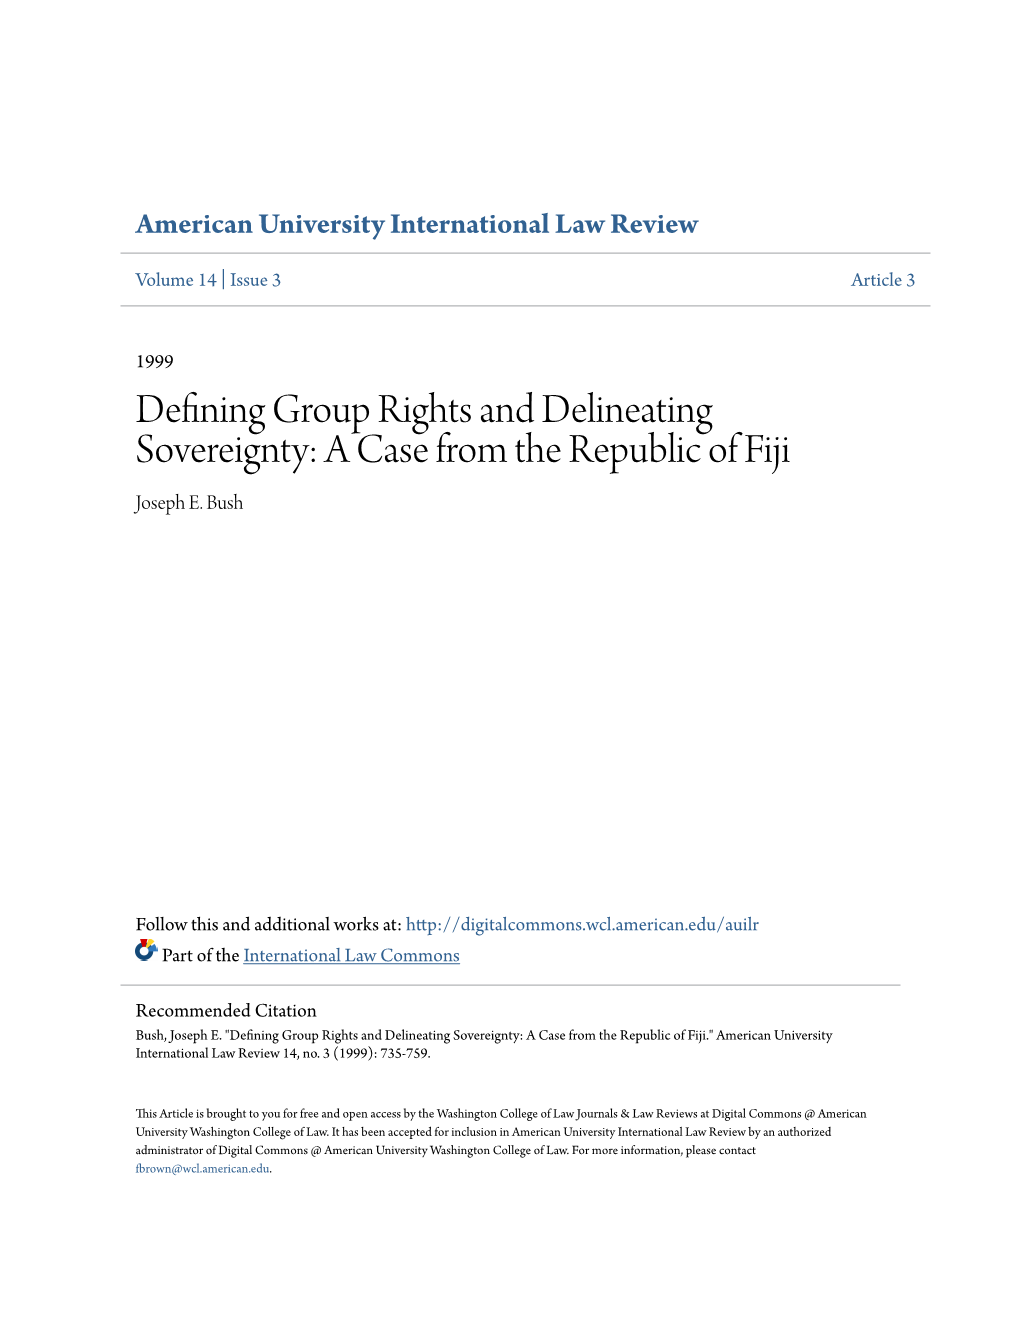 Defining Group Rights and Delineating Sovereignty: a Case from the Republic of Fiji Joseph E